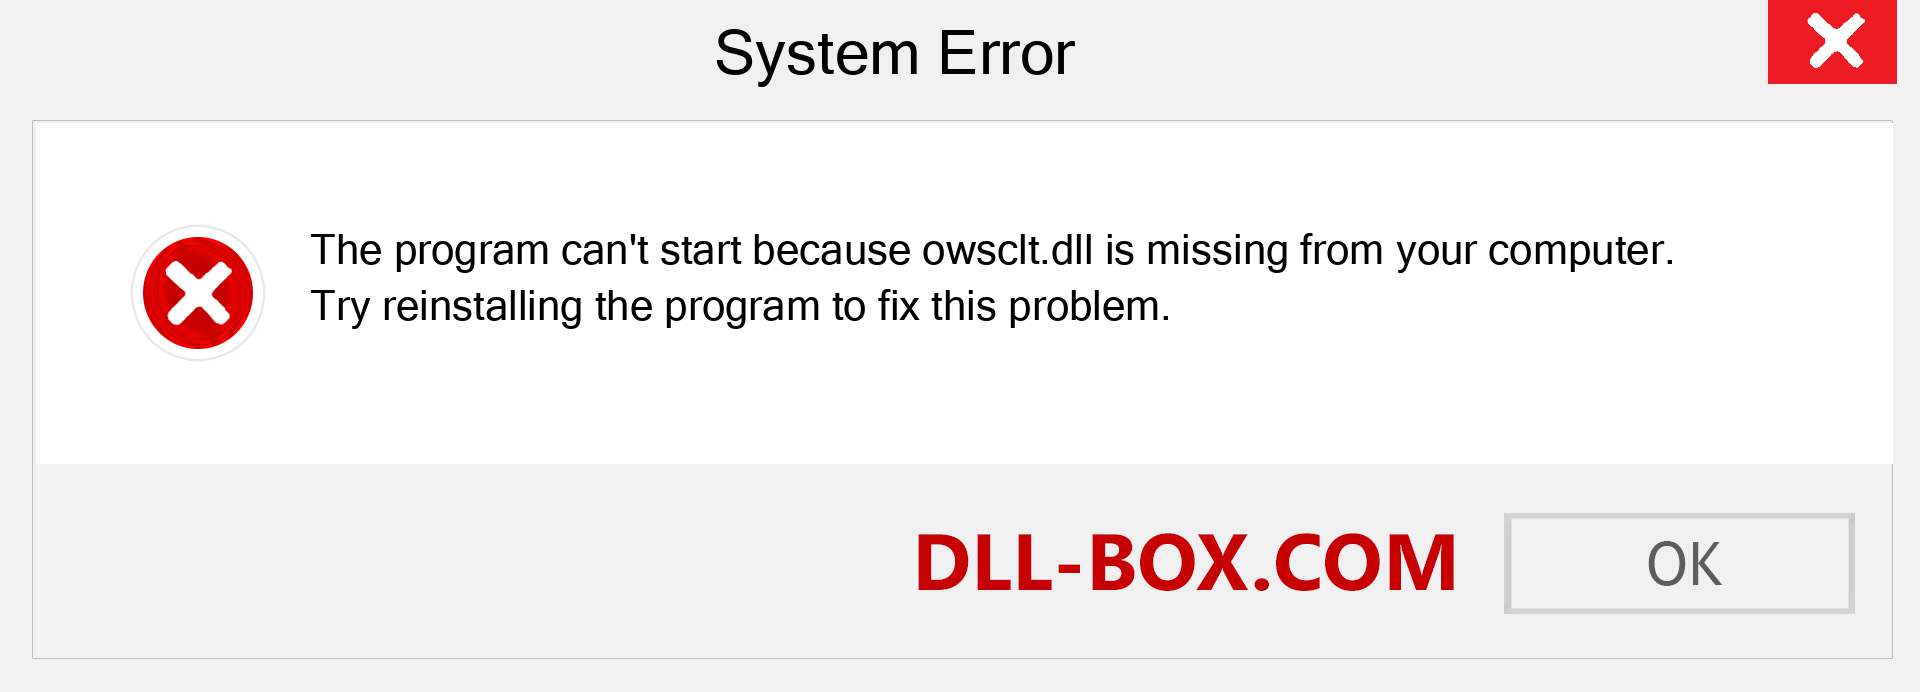  owsclt.dll file is missing?. Download for Windows 7, 8, 10 - Fix  owsclt dll Missing Error on Windows, photos, images